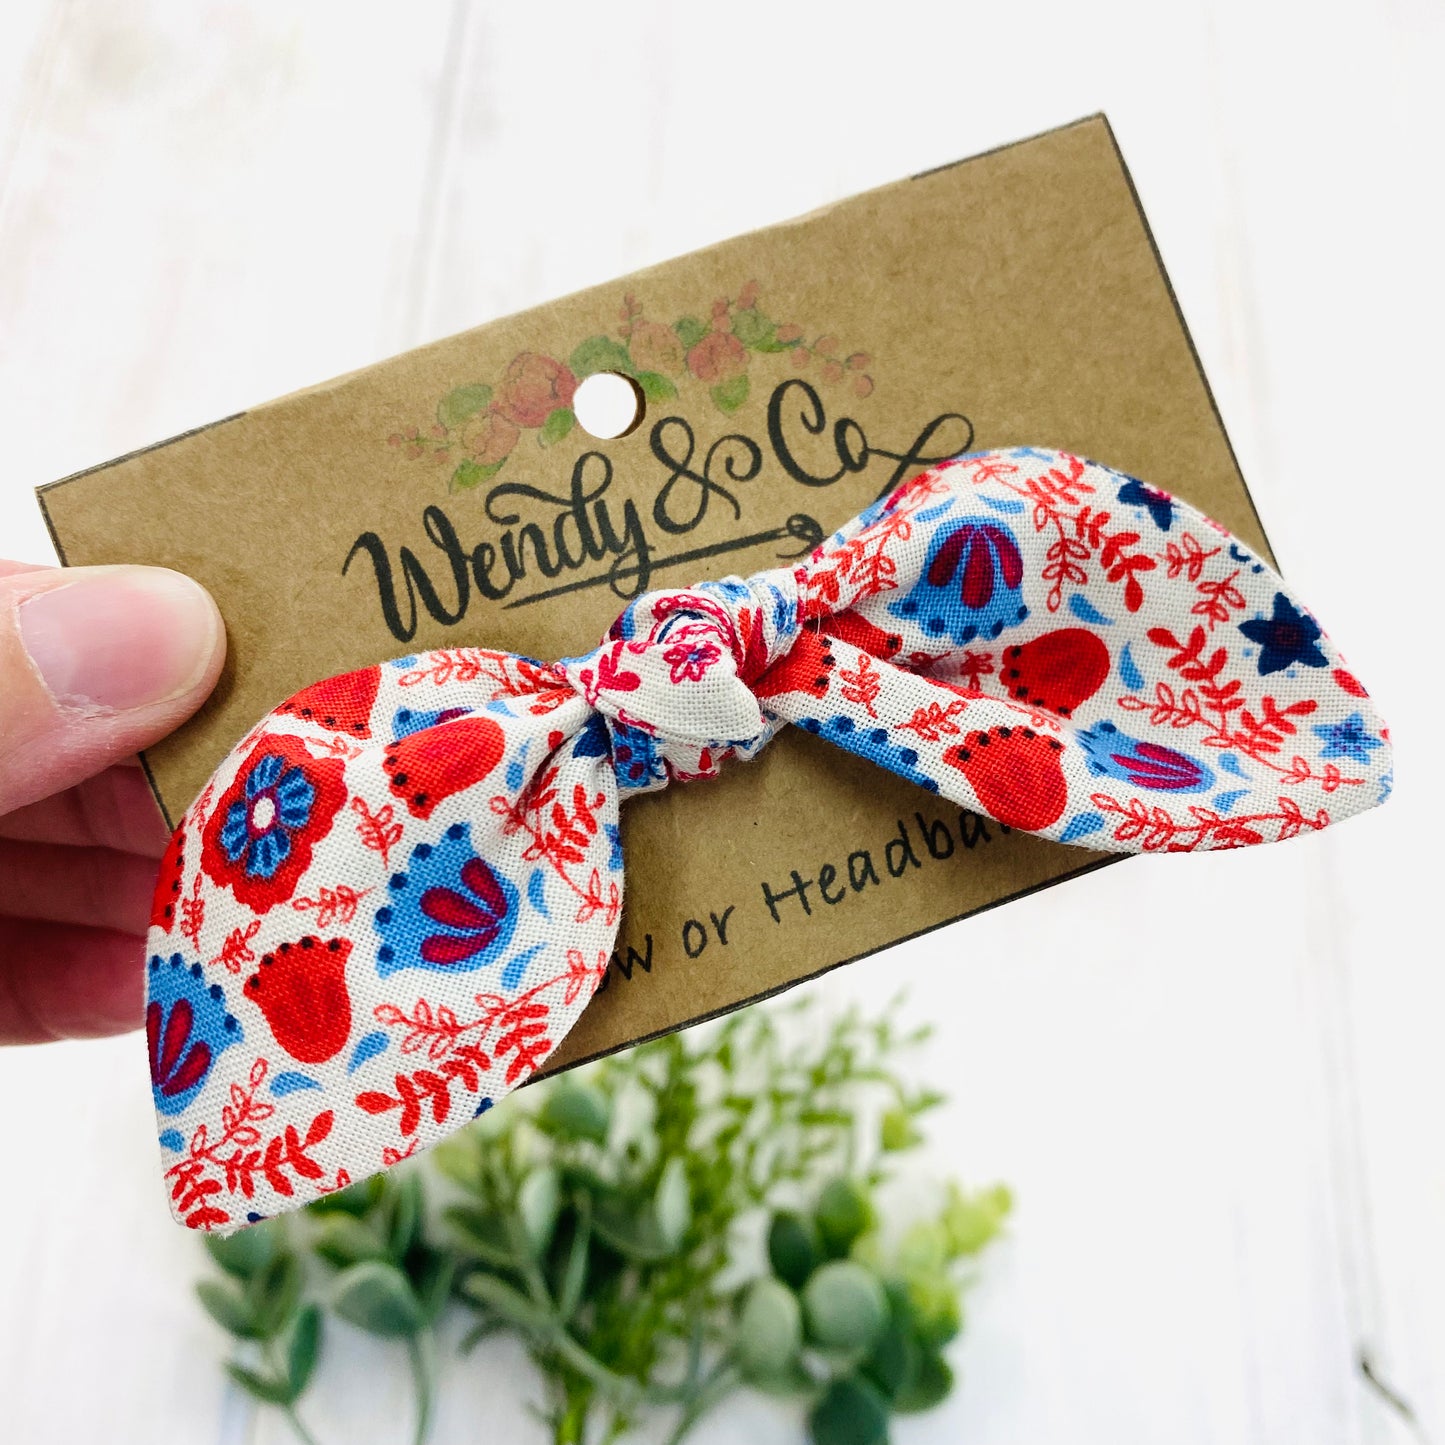 Handmade baby headband in floral blues and reds.